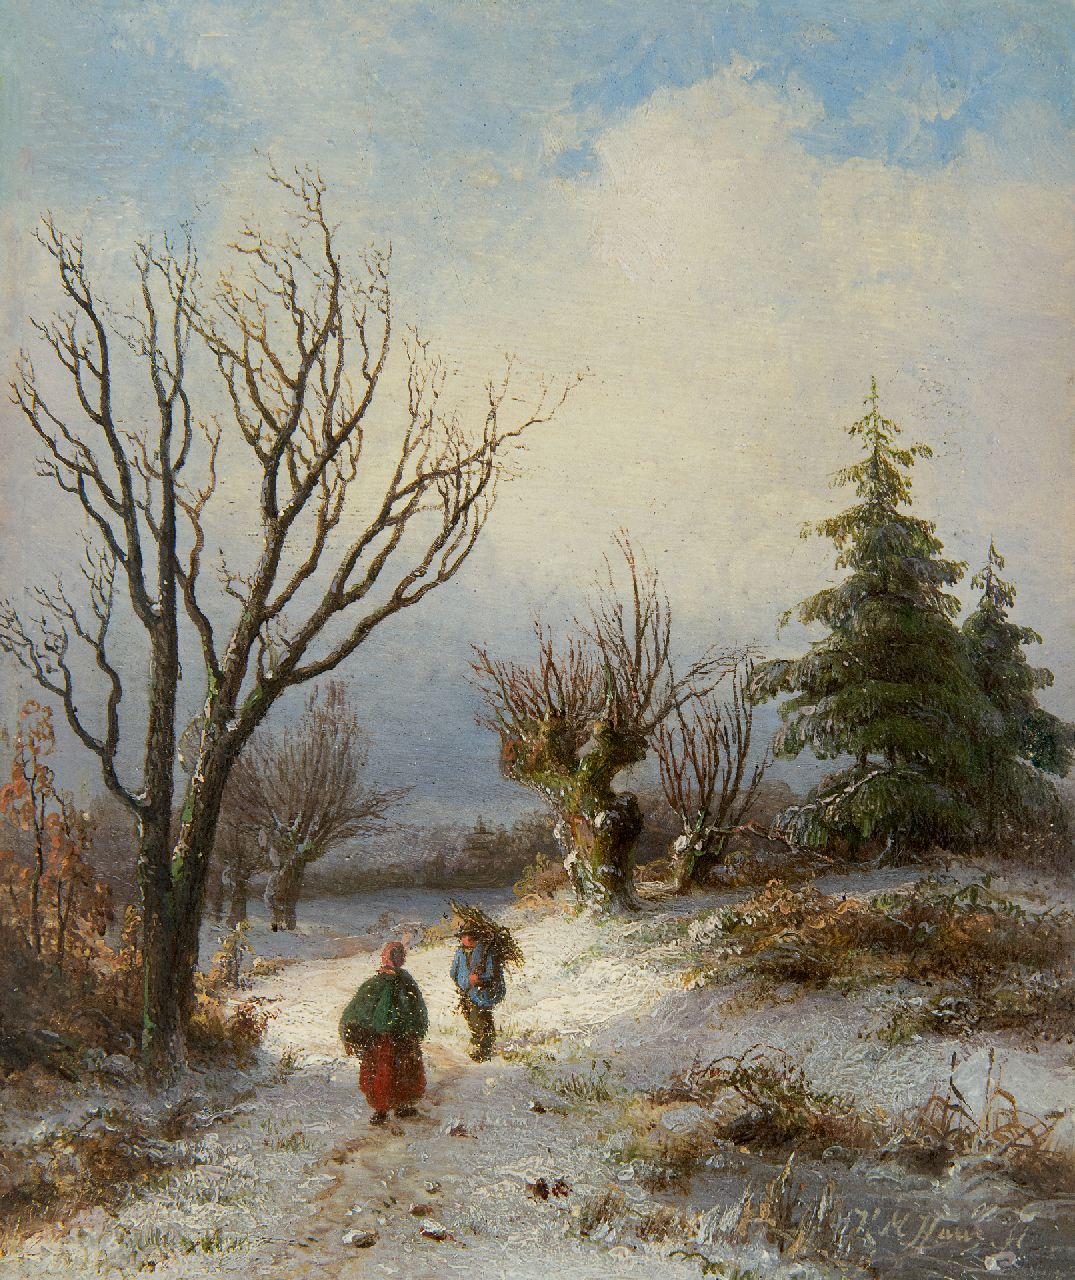 Haus H.M.  | Hendrik Manfried Haus | Paintings offered for sale | Gathering wood on a snowy path, oil on panel 17.7 x 15.1 cm, signed l.r.